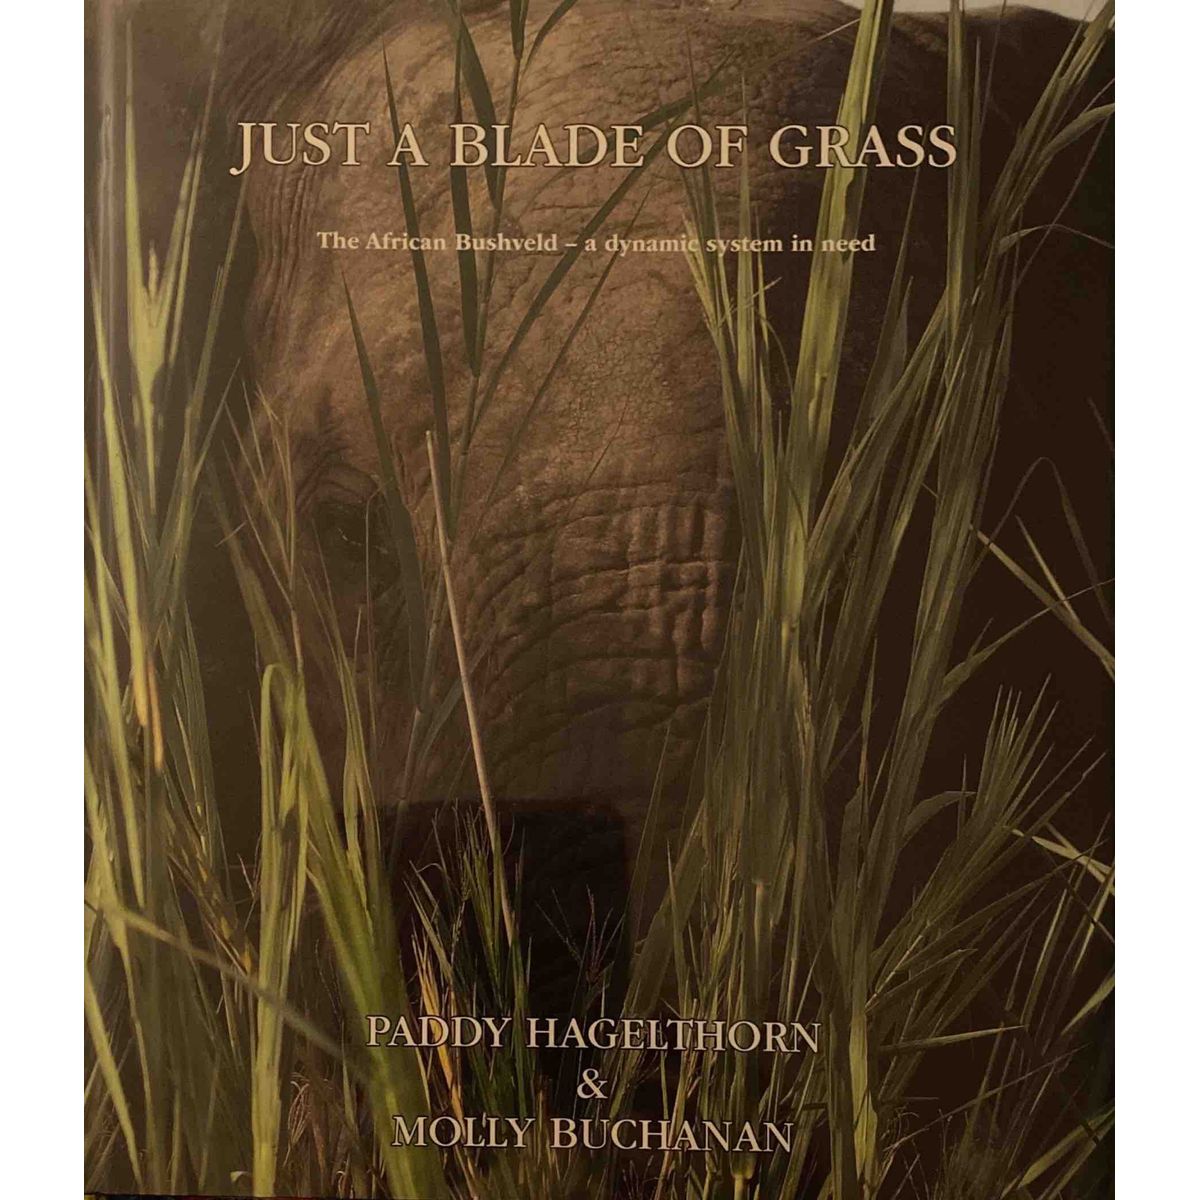 ISBN: 9780620768290 / 0620768290 - Just a Blade of Grass: The African Bushveld - A Dynamic System in Need by Paddy Hagelthorn & Molly Buchanan [2018]